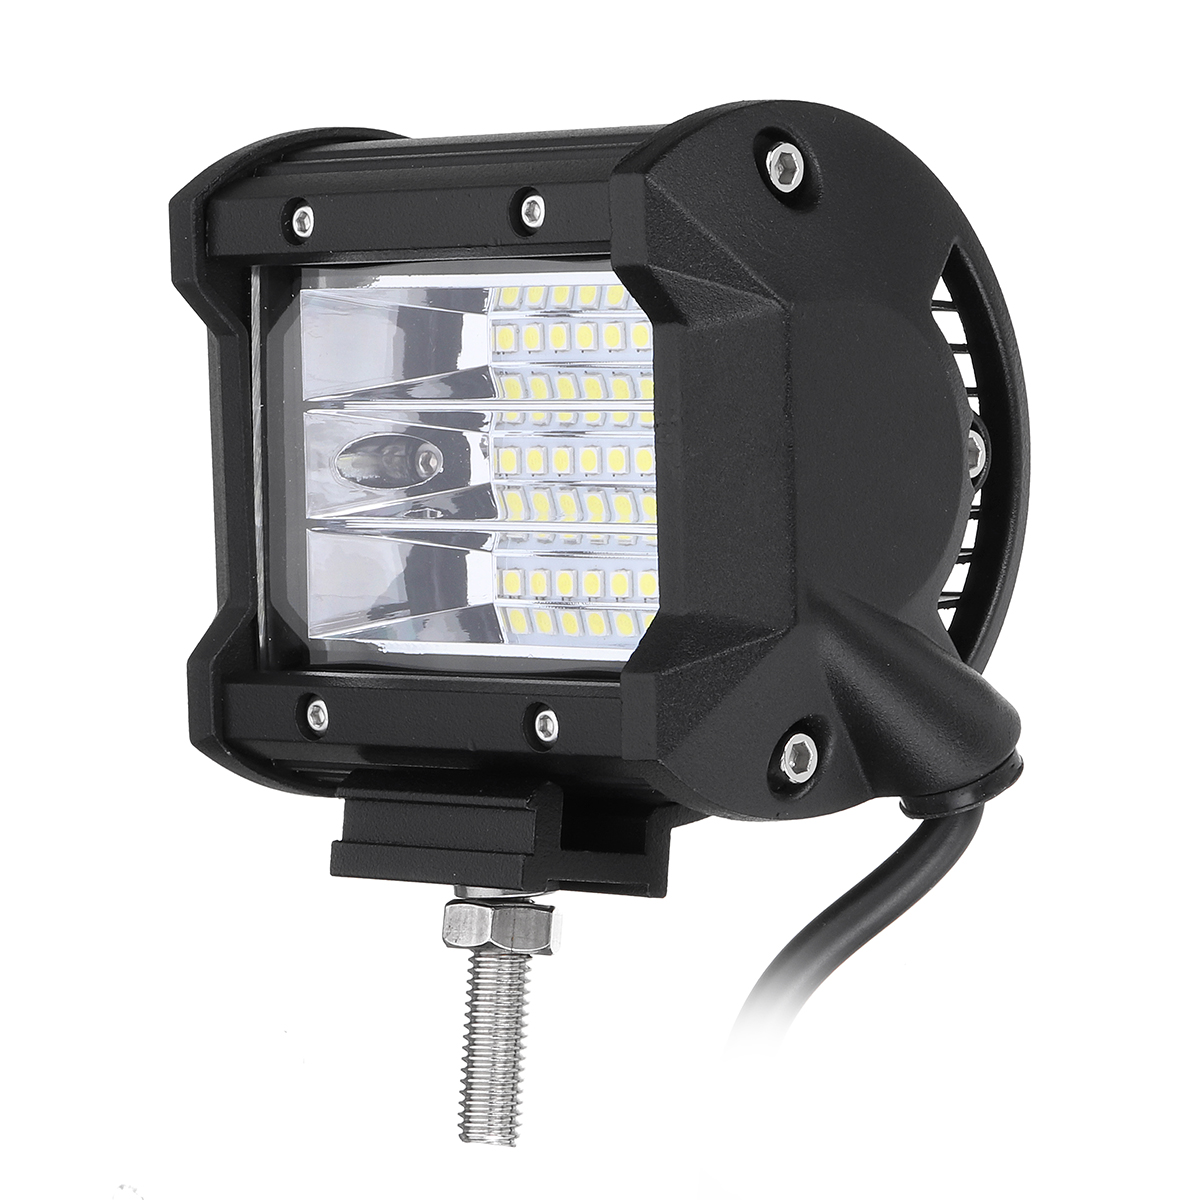 4-Inch-LED-Work-Light-Bar-Flood-Beam-Driving-Fog-Lamp-54W-5400LM-for-Jeep-Offroad-Truck-SUV-1398049